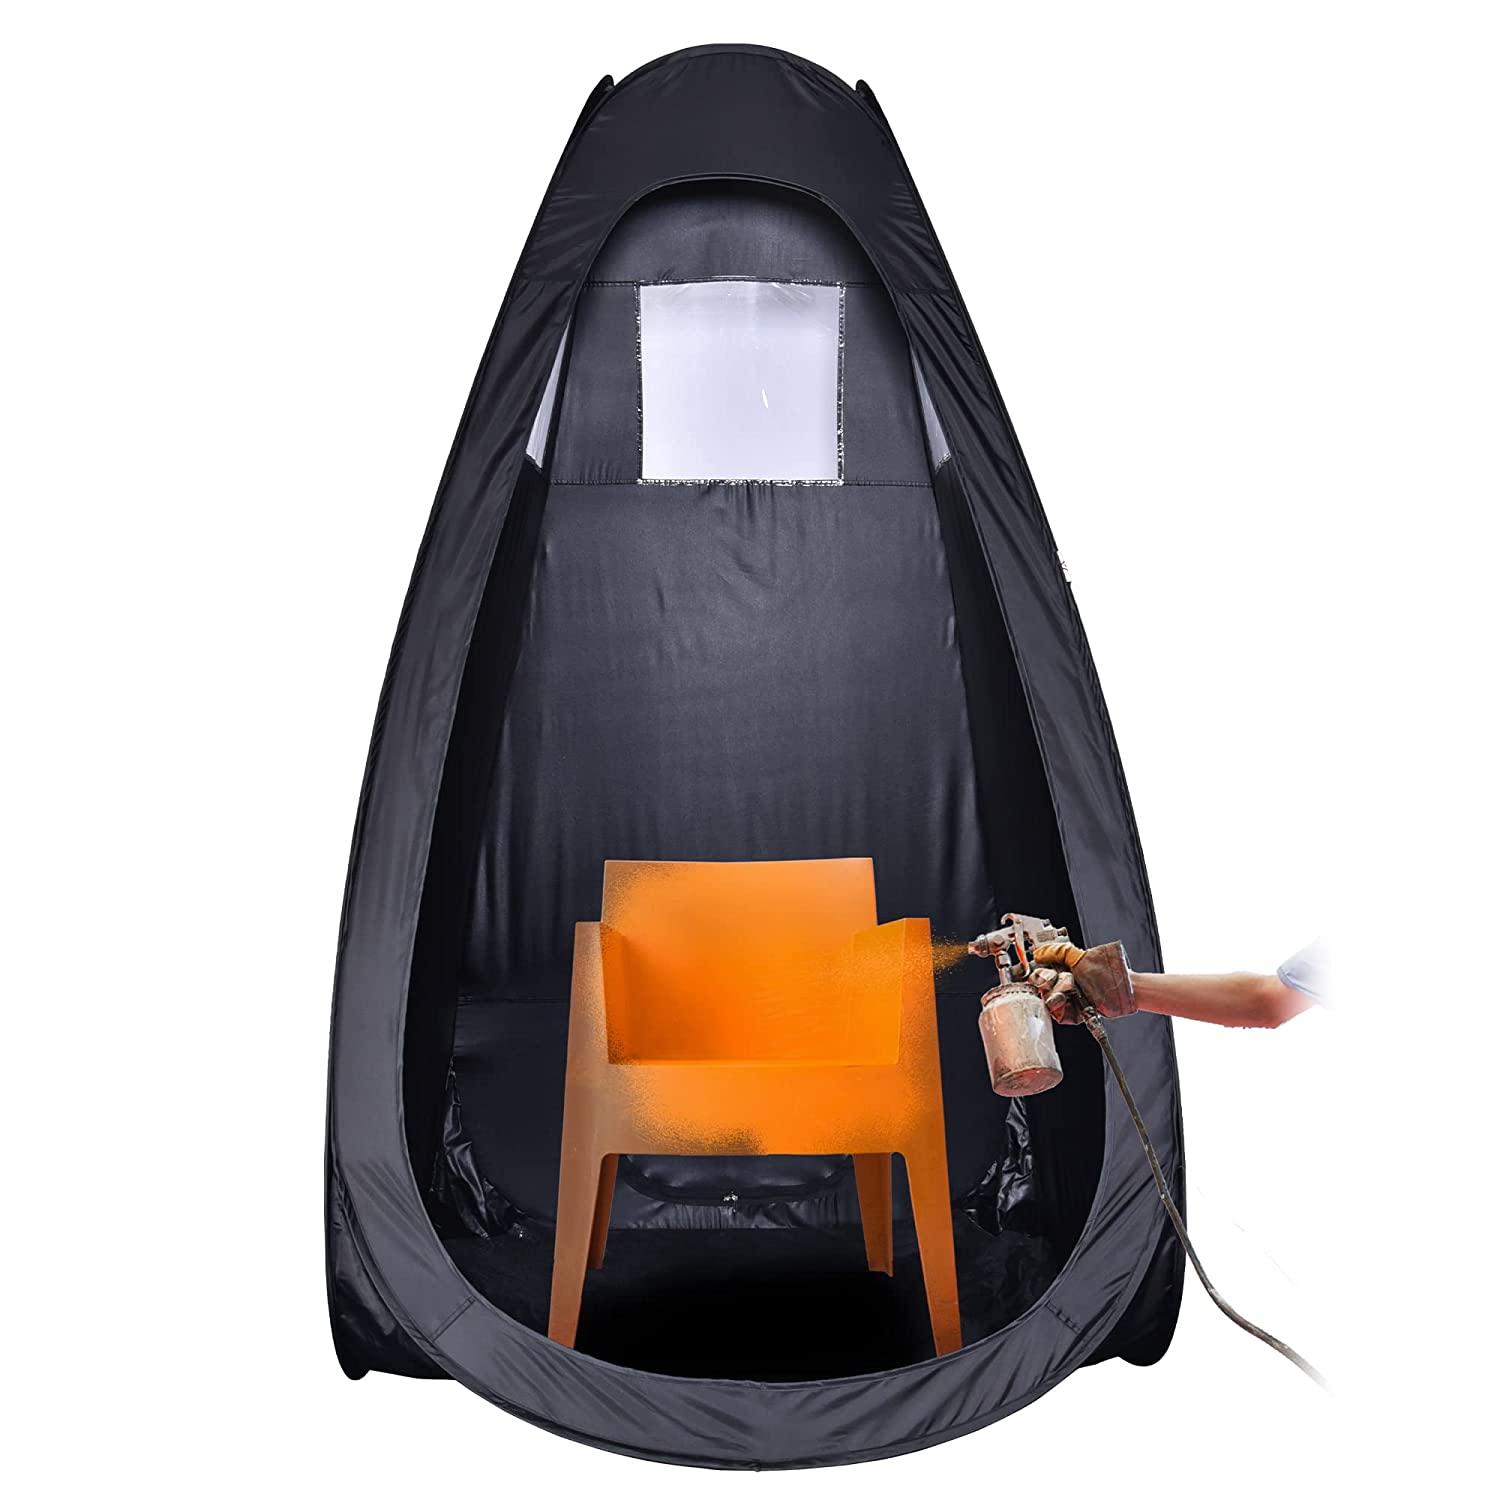 AW Black Spray Tanning Tent Pop Up Portable Spraying Booth Sunless  Waterproof Tanning Tents Clear Window with Carry Bag for Makeup Painting